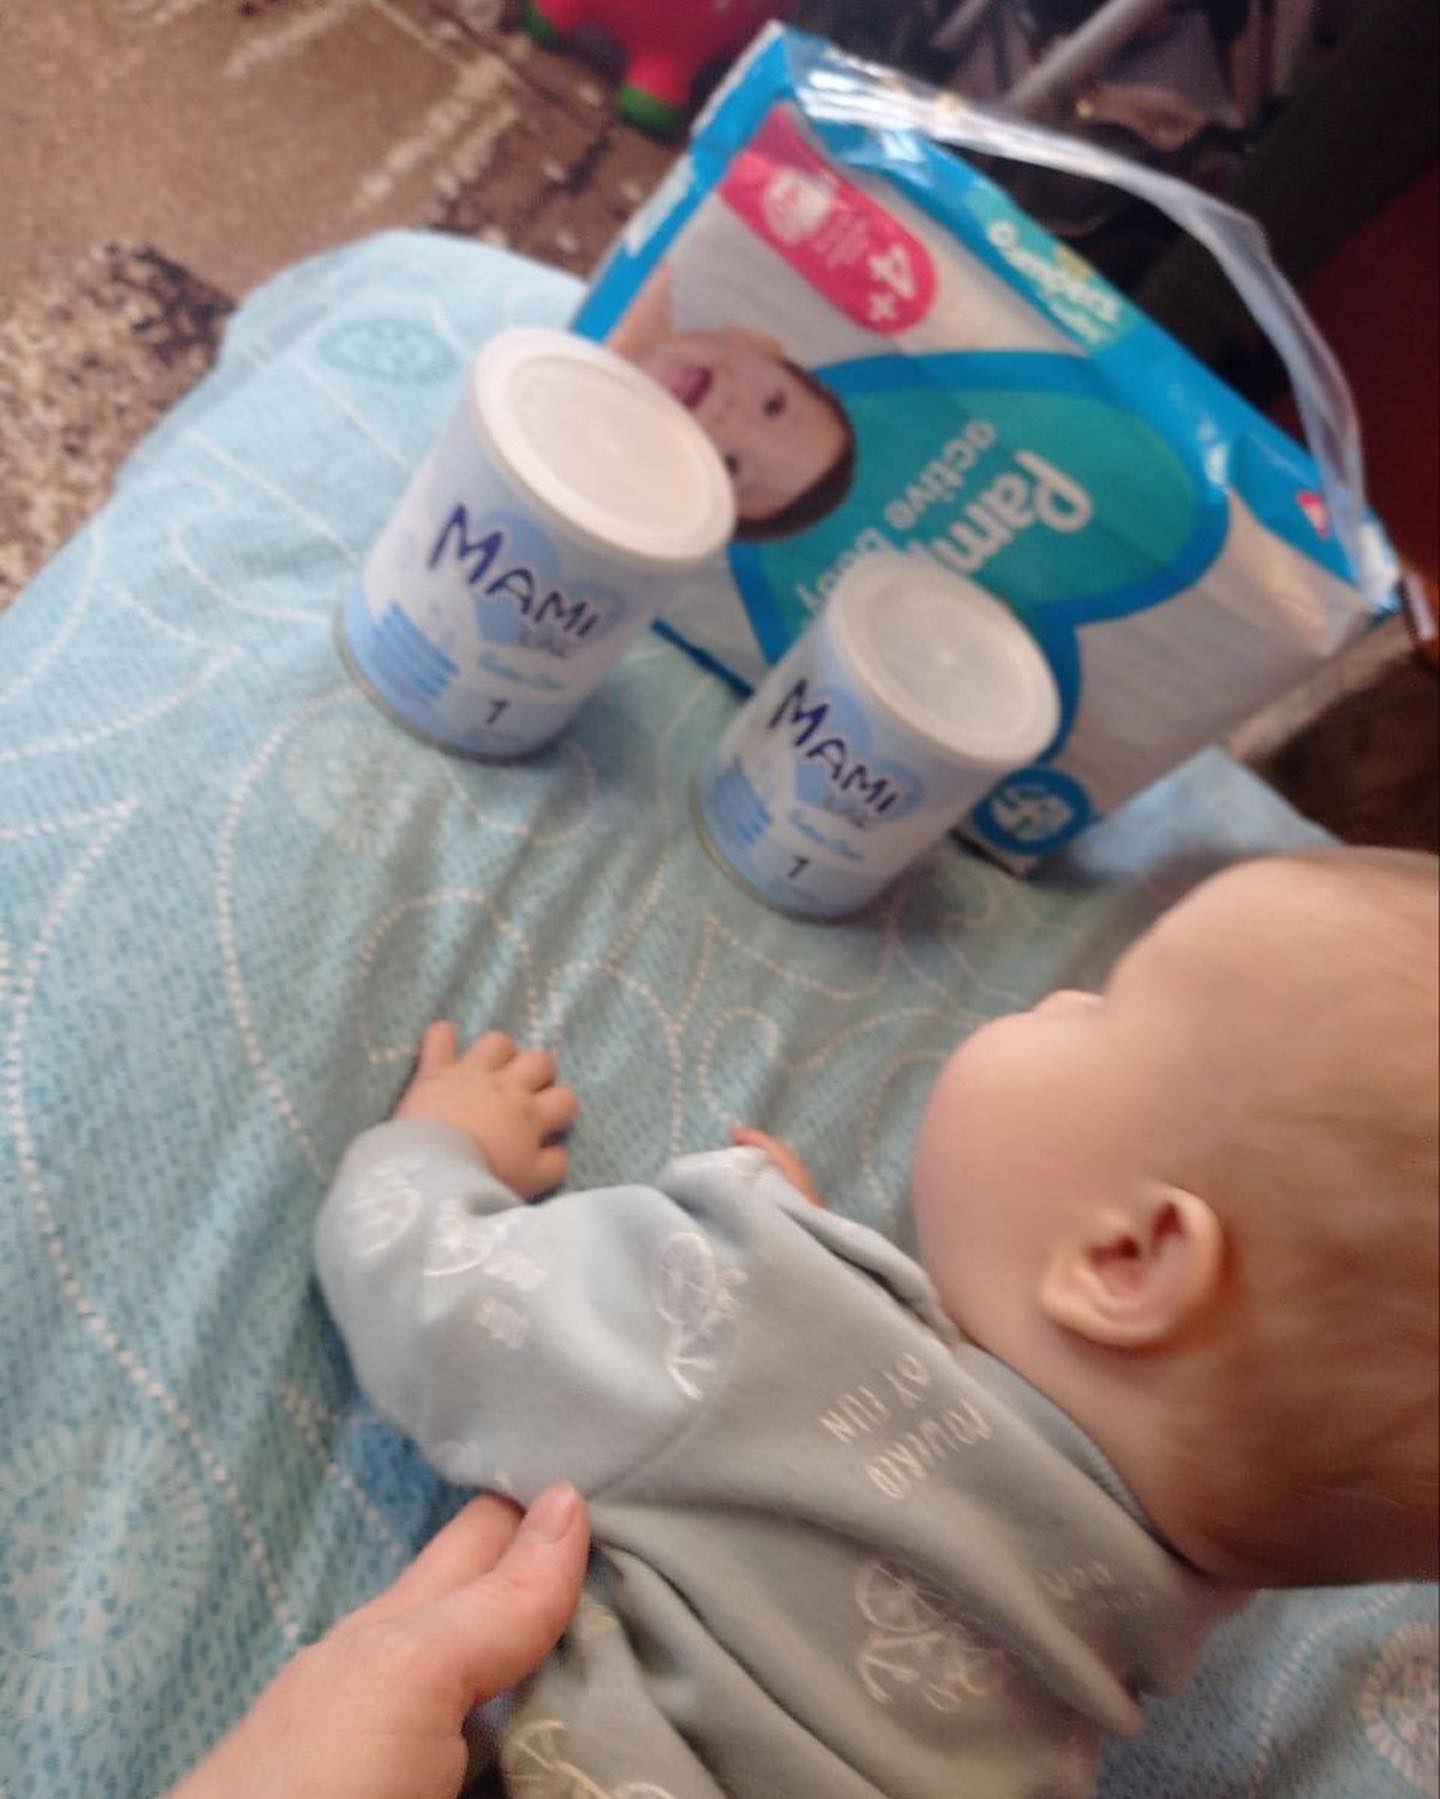 A baby is laying on a bed next to a box of diapers.